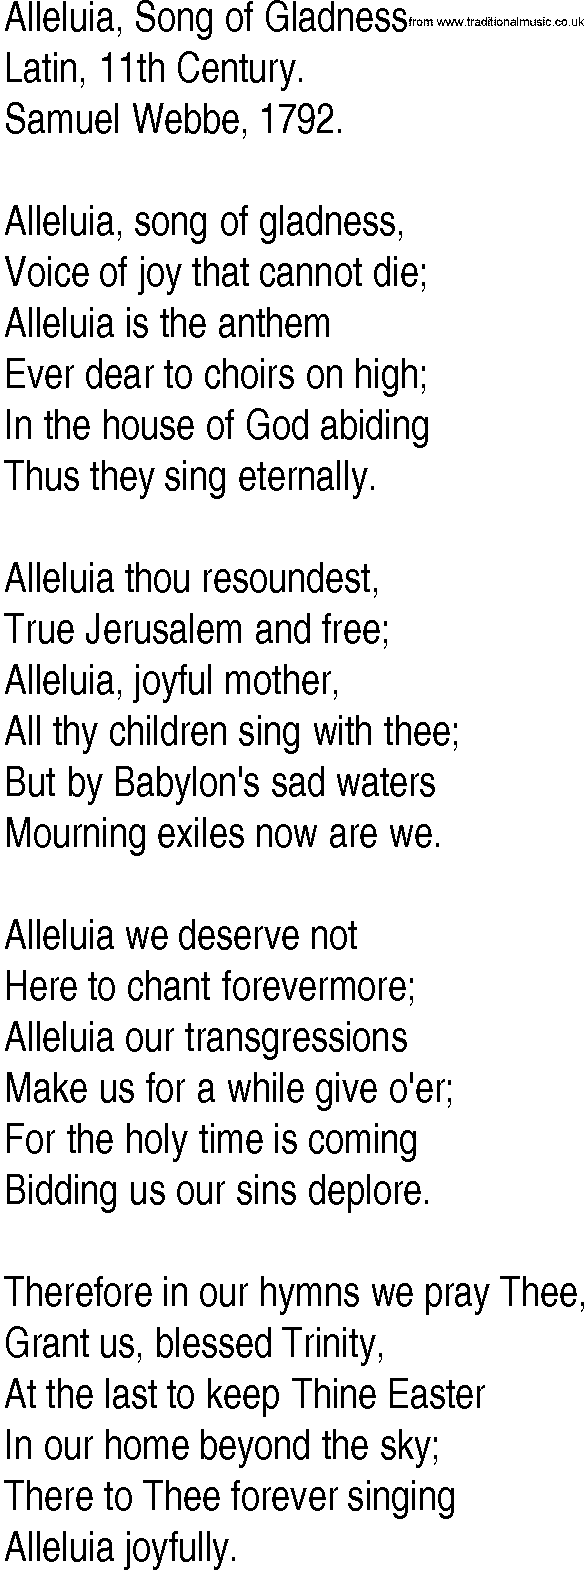 Hymn and Gospel Song: Alleluia, Song of Gladness by Latin th Century lyrics